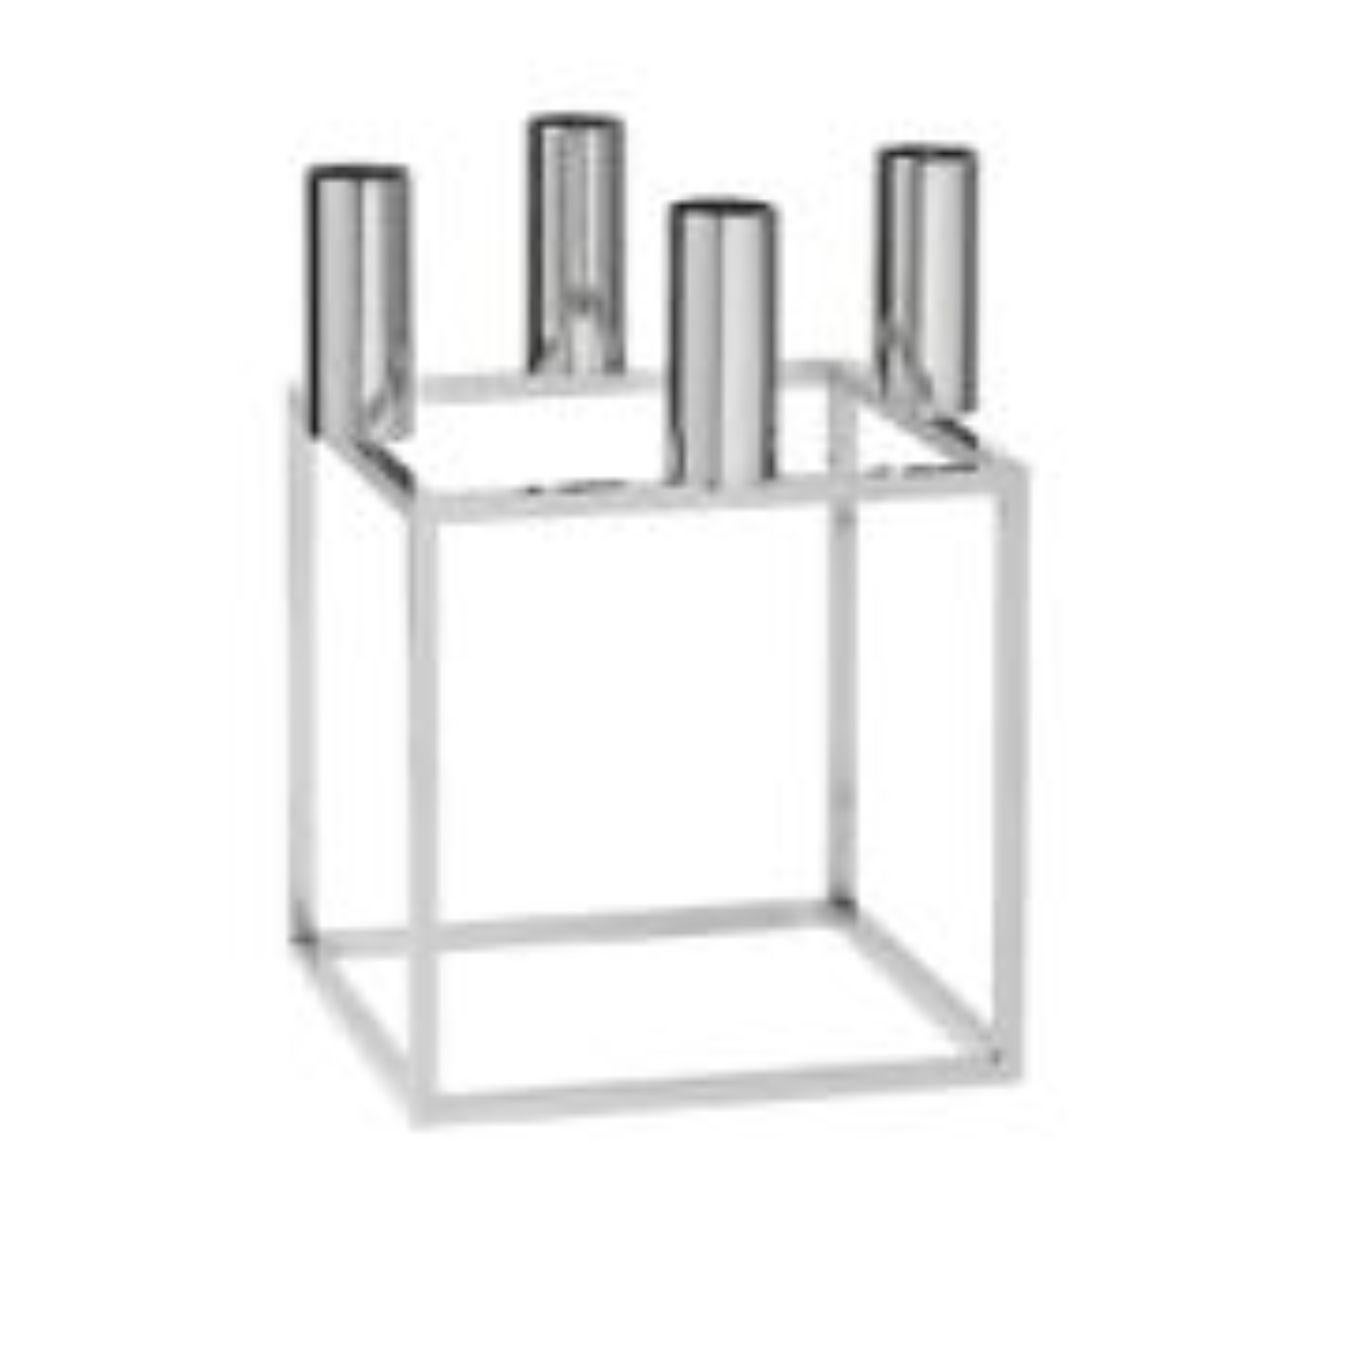 Nickel plated kubus 4 candle holder by Lassen
Dimensions: D 14 x W 14 x H 20 cm 
Materials: Metal 
Also available in different dimensions. 
Weight: 1.50 kg

A new small wonder has seen the light of day. Kubus Micro is a stylish, smaller